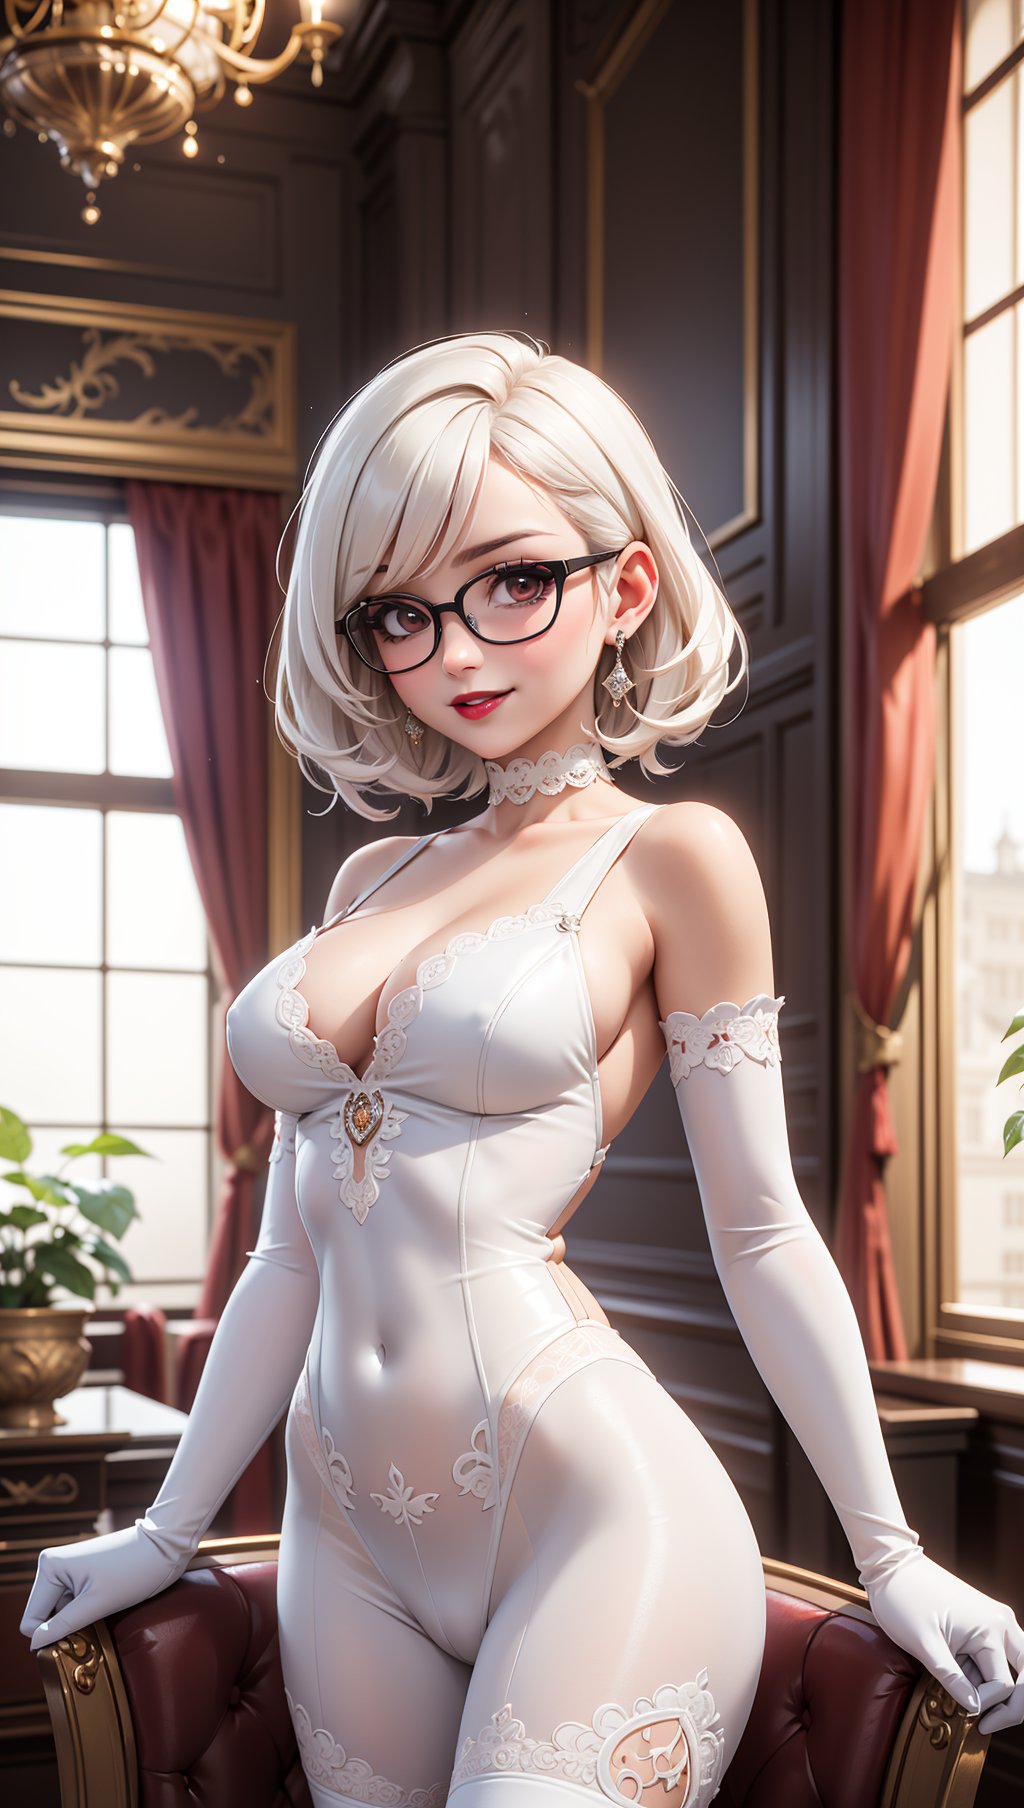 A photo of a young woman. (looking at the viewer). (short messy dark hair),(slender),(dark lips),flirting with the camera. (white sclera),(square glasses),(dark makeup),(white choker),(jewelry),(smiling),(dyed hair, hair color),(white intricate foliage filigree embroidered),(sleeved) plunging lace sheer v-neck (catsuit),(unitard),(long gloves, bolero),(well lit, warm natural light),ornate lavish rich aristocrat royal mansion,music room,art,drapes,curtains,carpets,rugs,doors,(chaise lounge) (confident, seductive, dominant, intimidating),